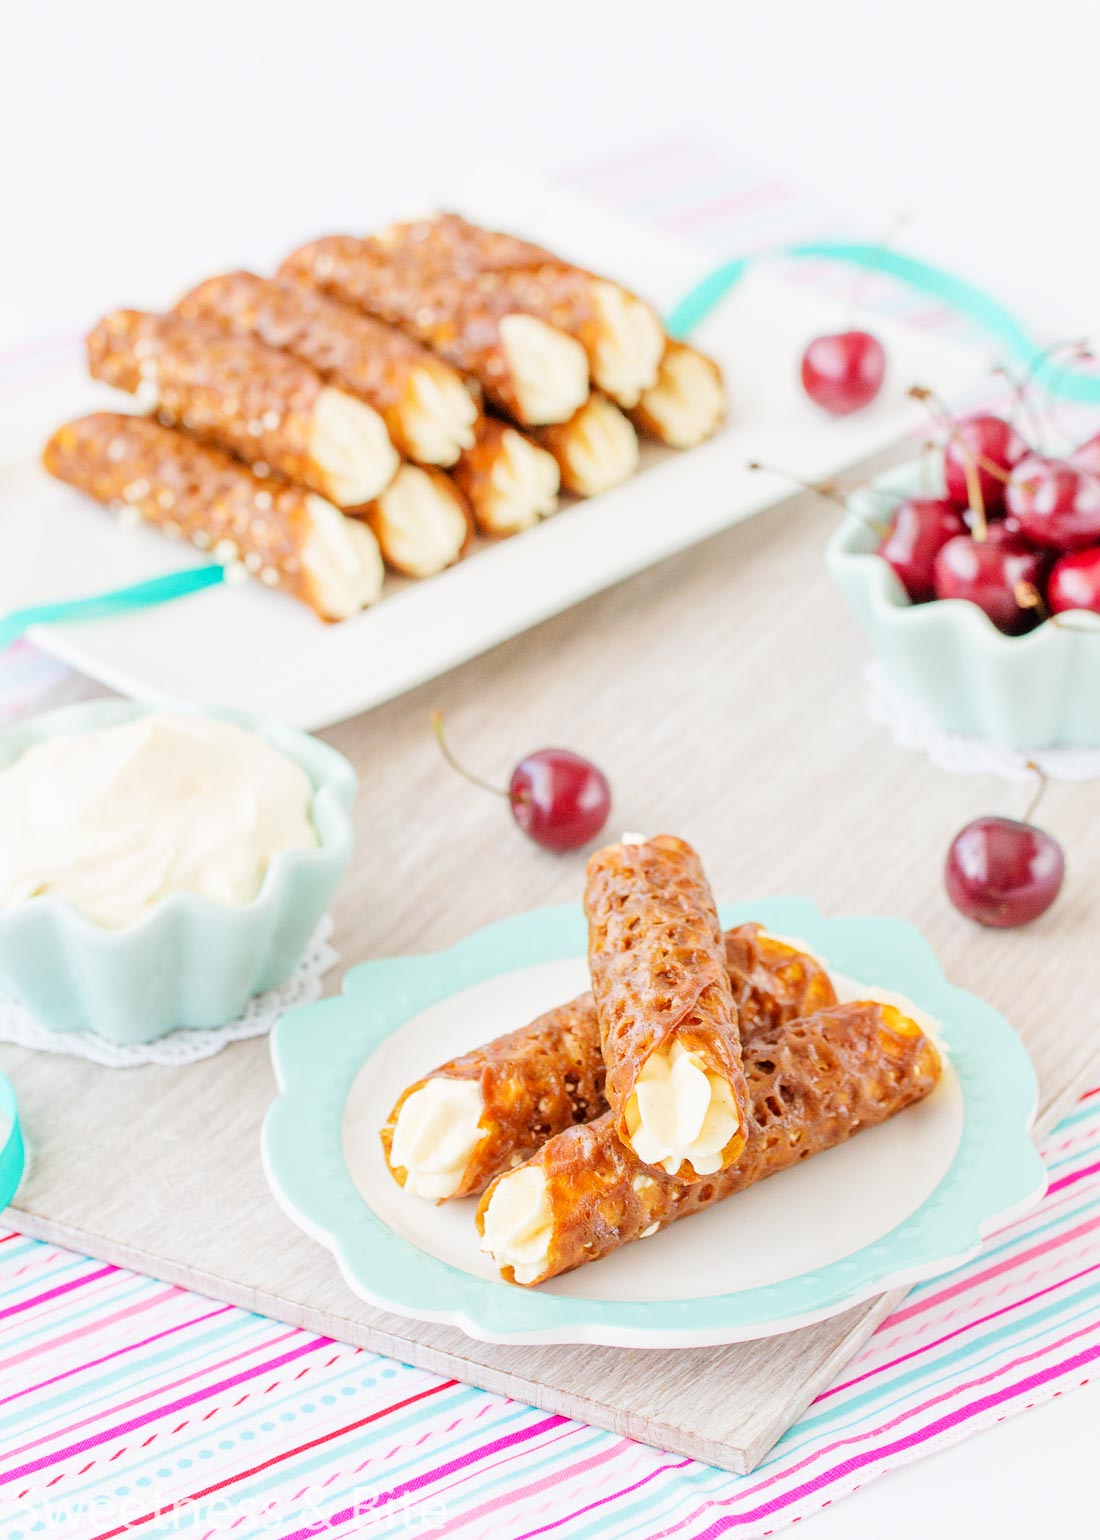 Three gluten free brandy snaps stacked on a plate in the foreground, with a bowl of whipped cream and fresh cherries in the background.